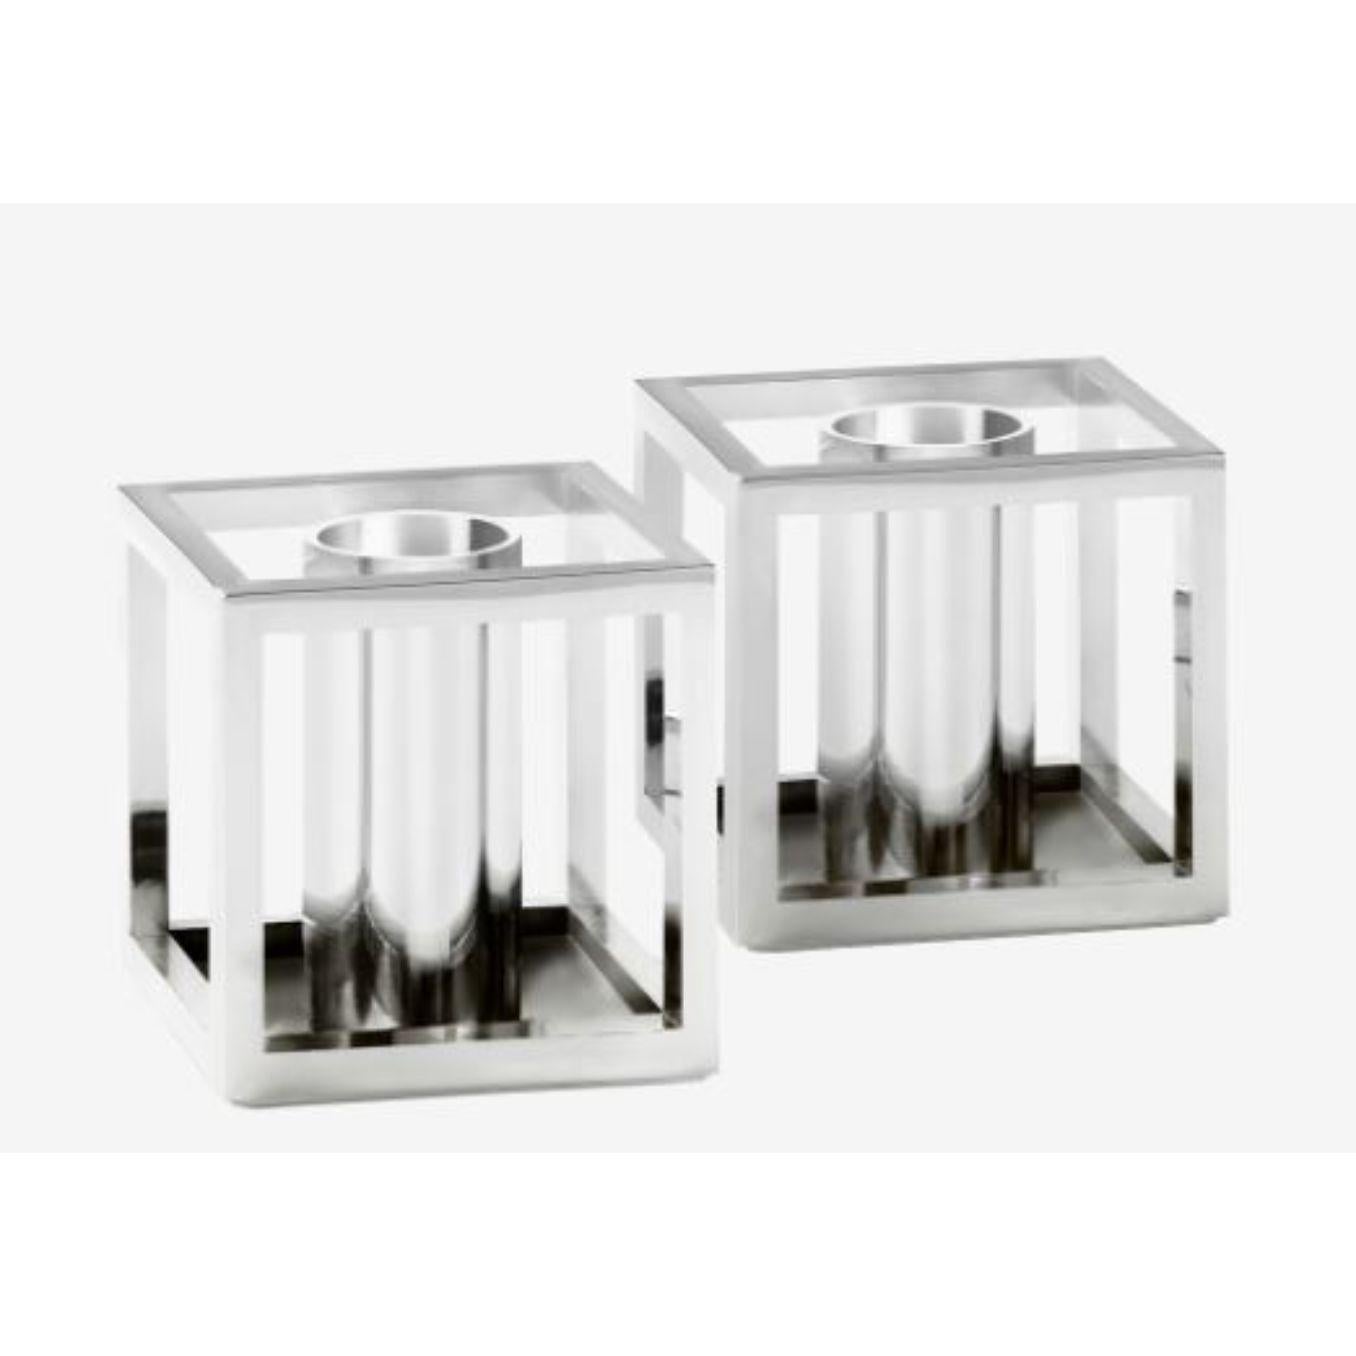 Modern Set of 4 Nickel Plated Kubus Micro Candle Holders by Lassen